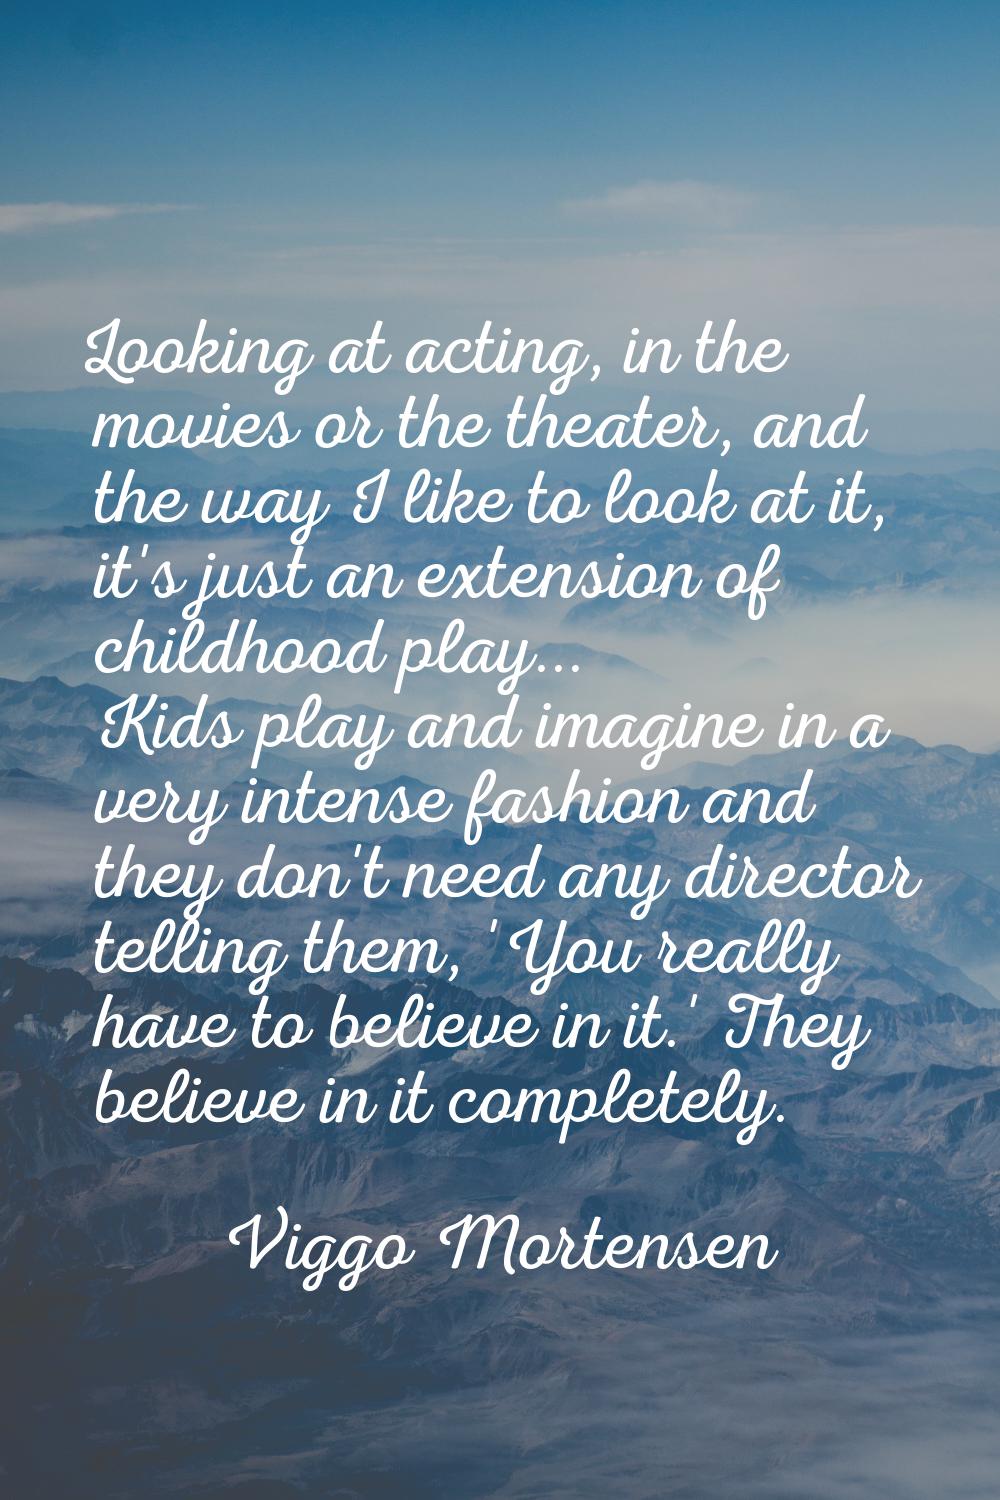 Looking at acting, in the movies or the theater, and the way I like to look at it, it's just an ext